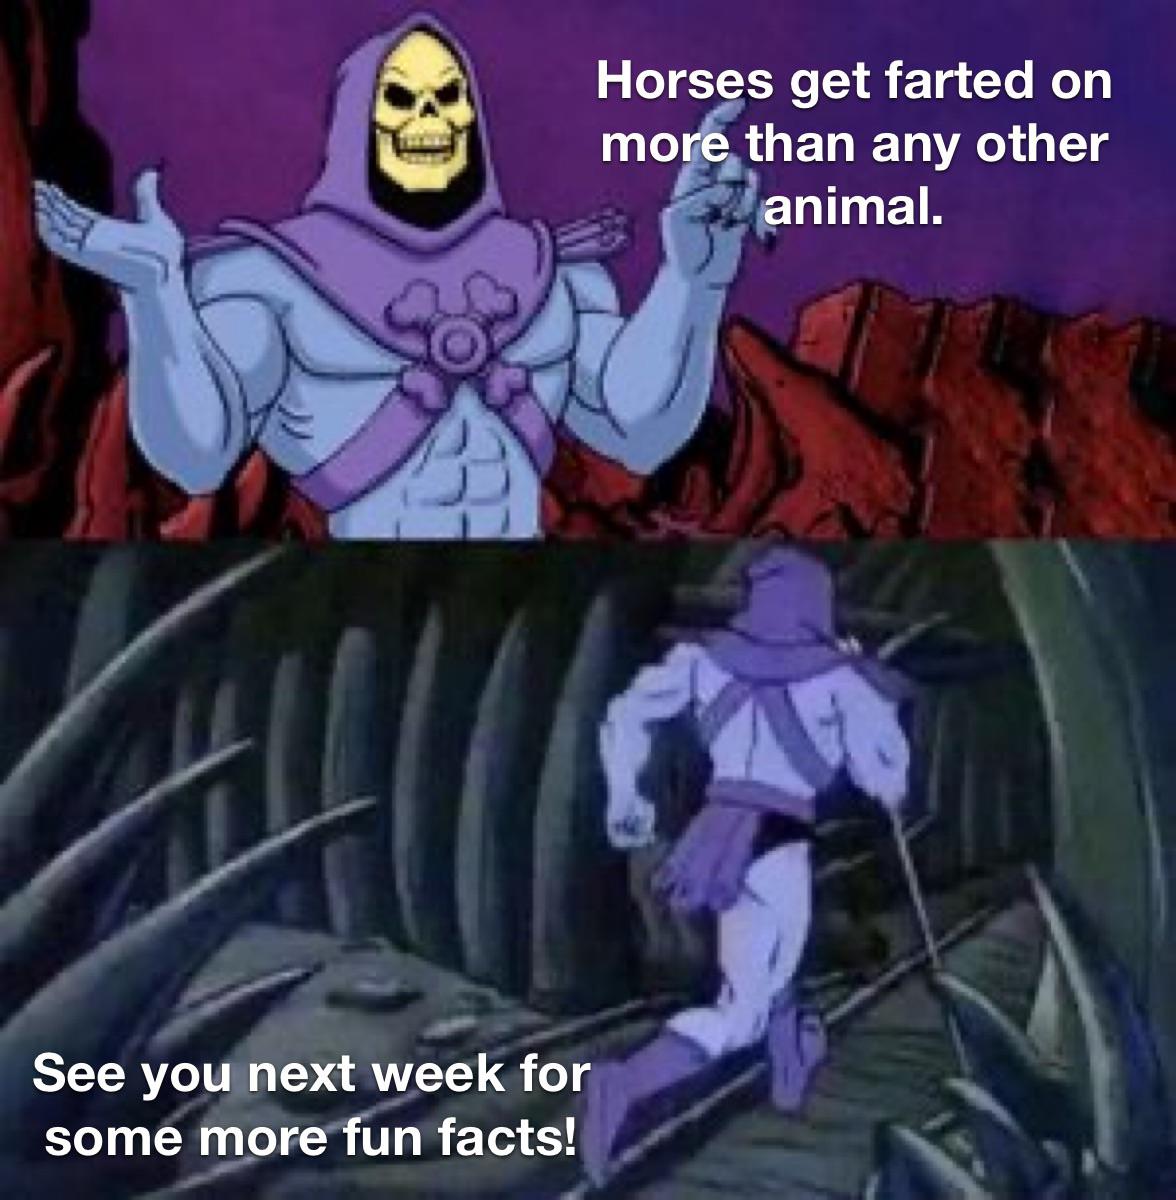 skeletor facts meme template - Horses get farted on more than any other animal. See you next week for some more fun facts!